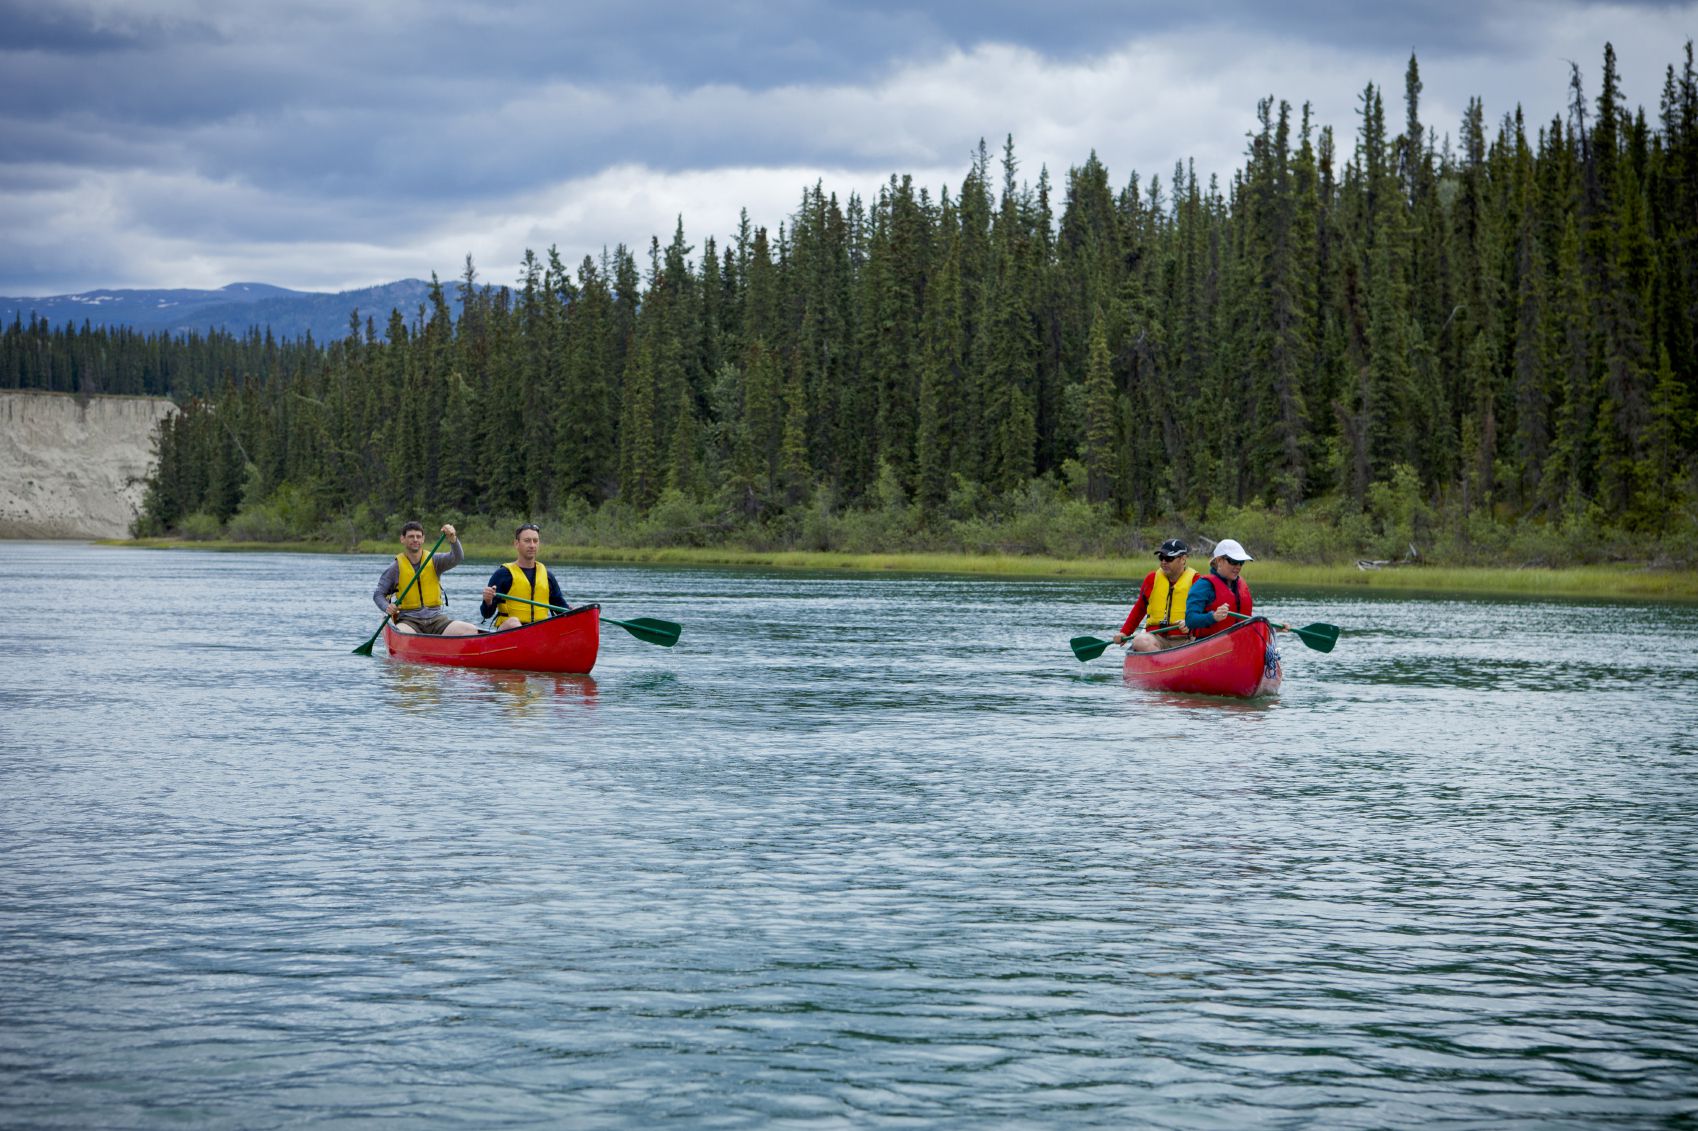 Two canoes that hold two people in each vessel coast down the blue Yukon River with Greenery and the blue sky behind them.